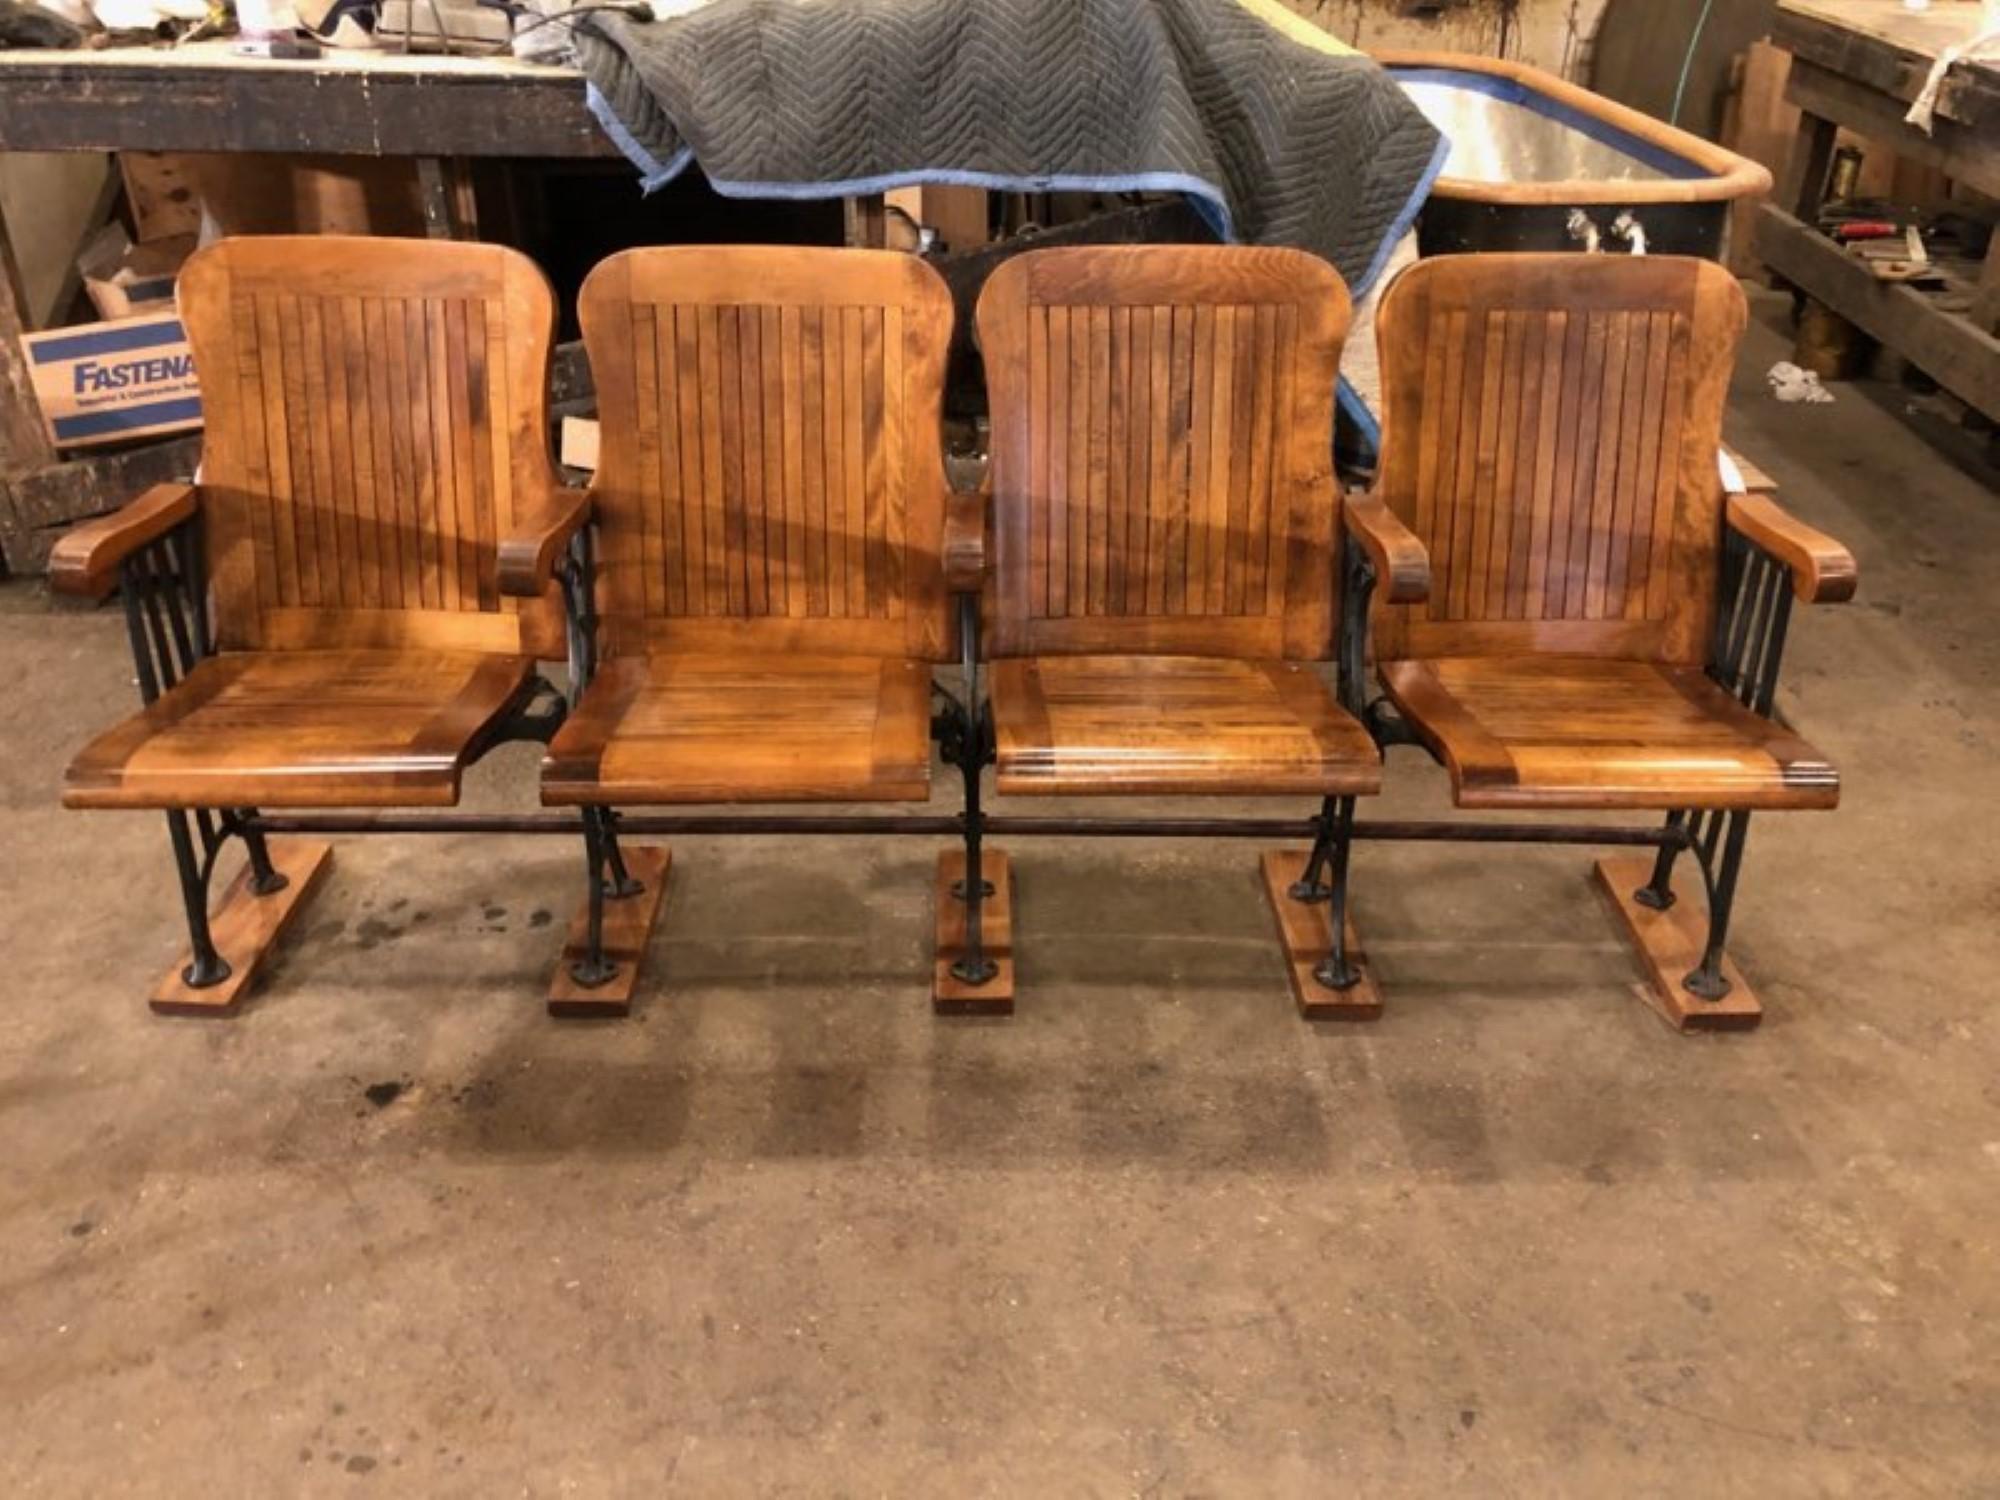 Eric, 1905 Four Seat Folding Theater Chairs with Cast Iron Frame from Brooklyn 5